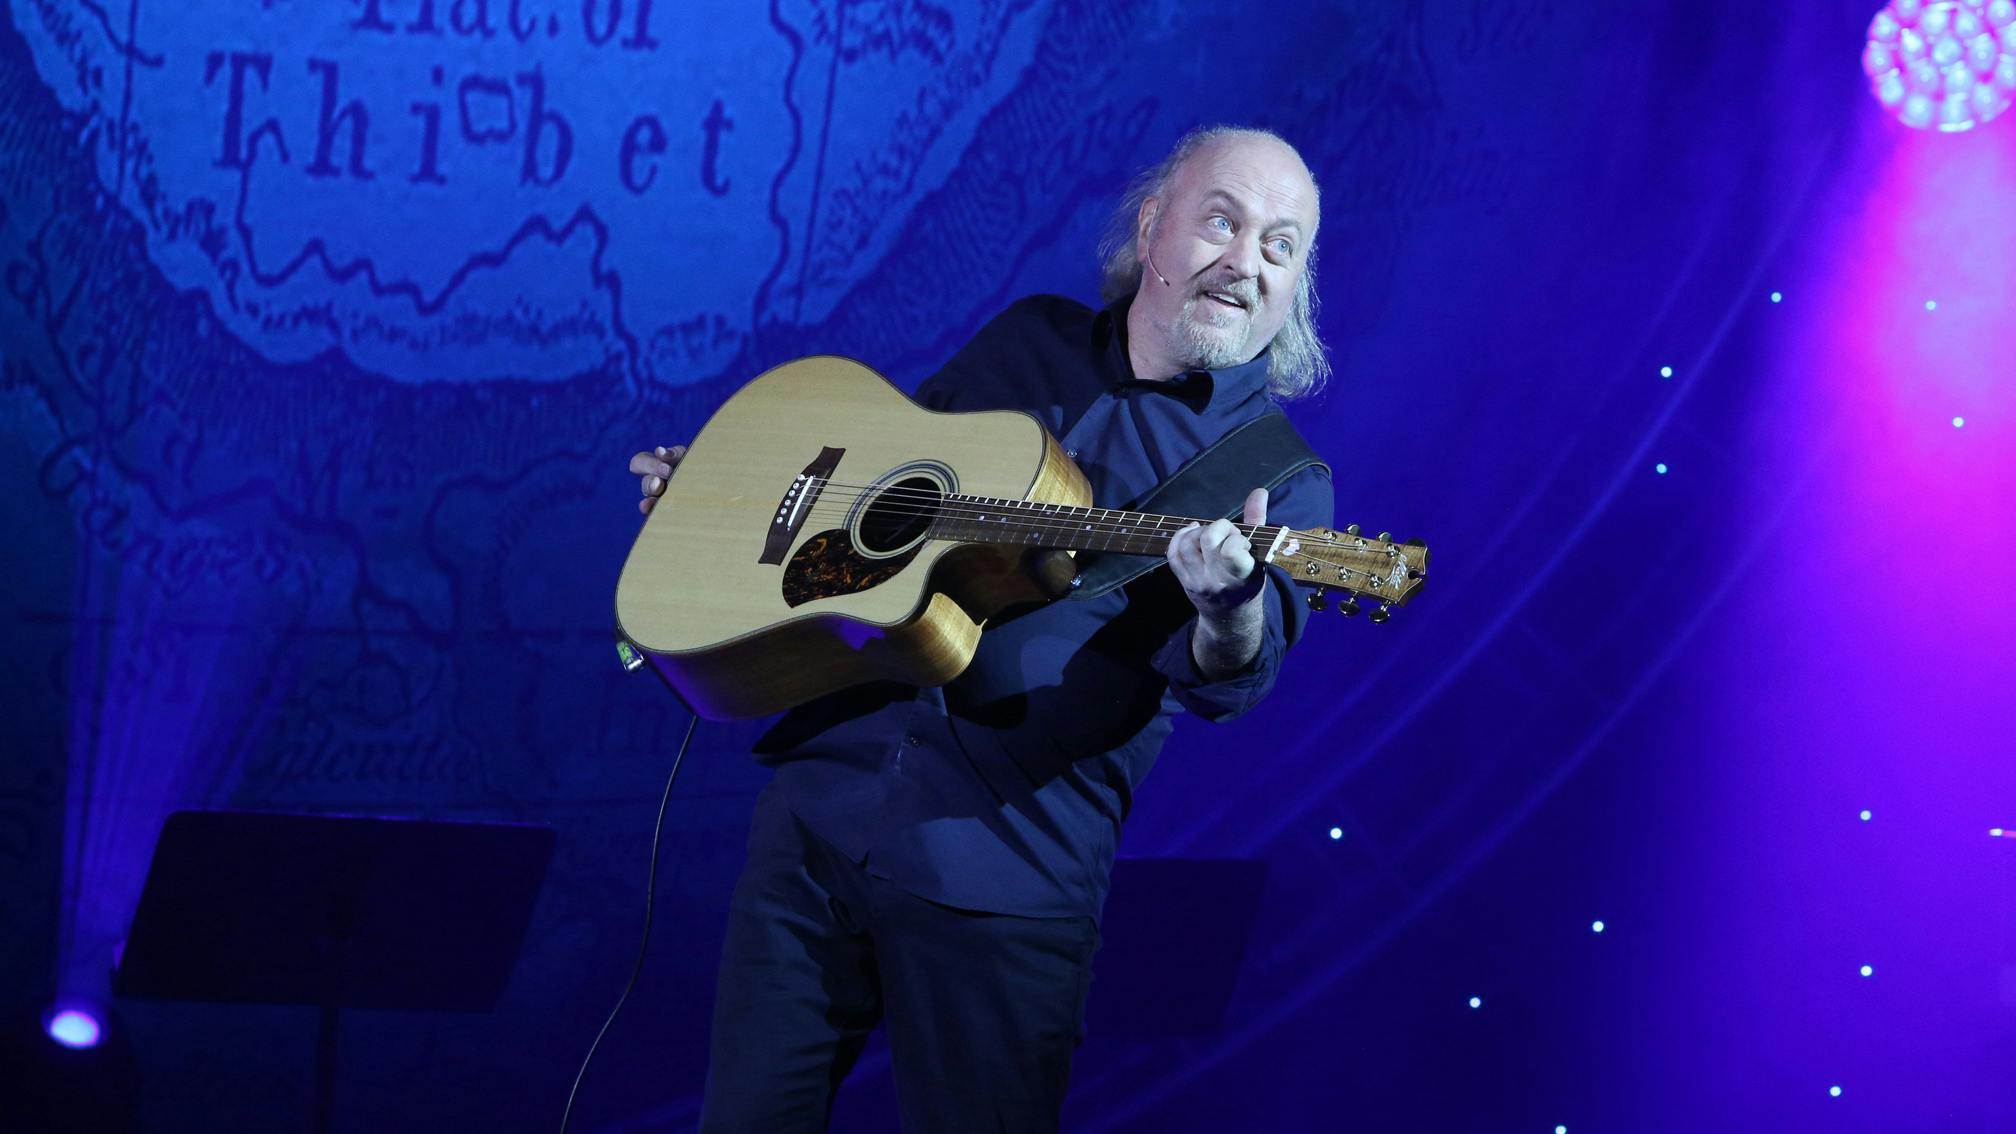 Bill Bailey: The 10 songs that changed my life